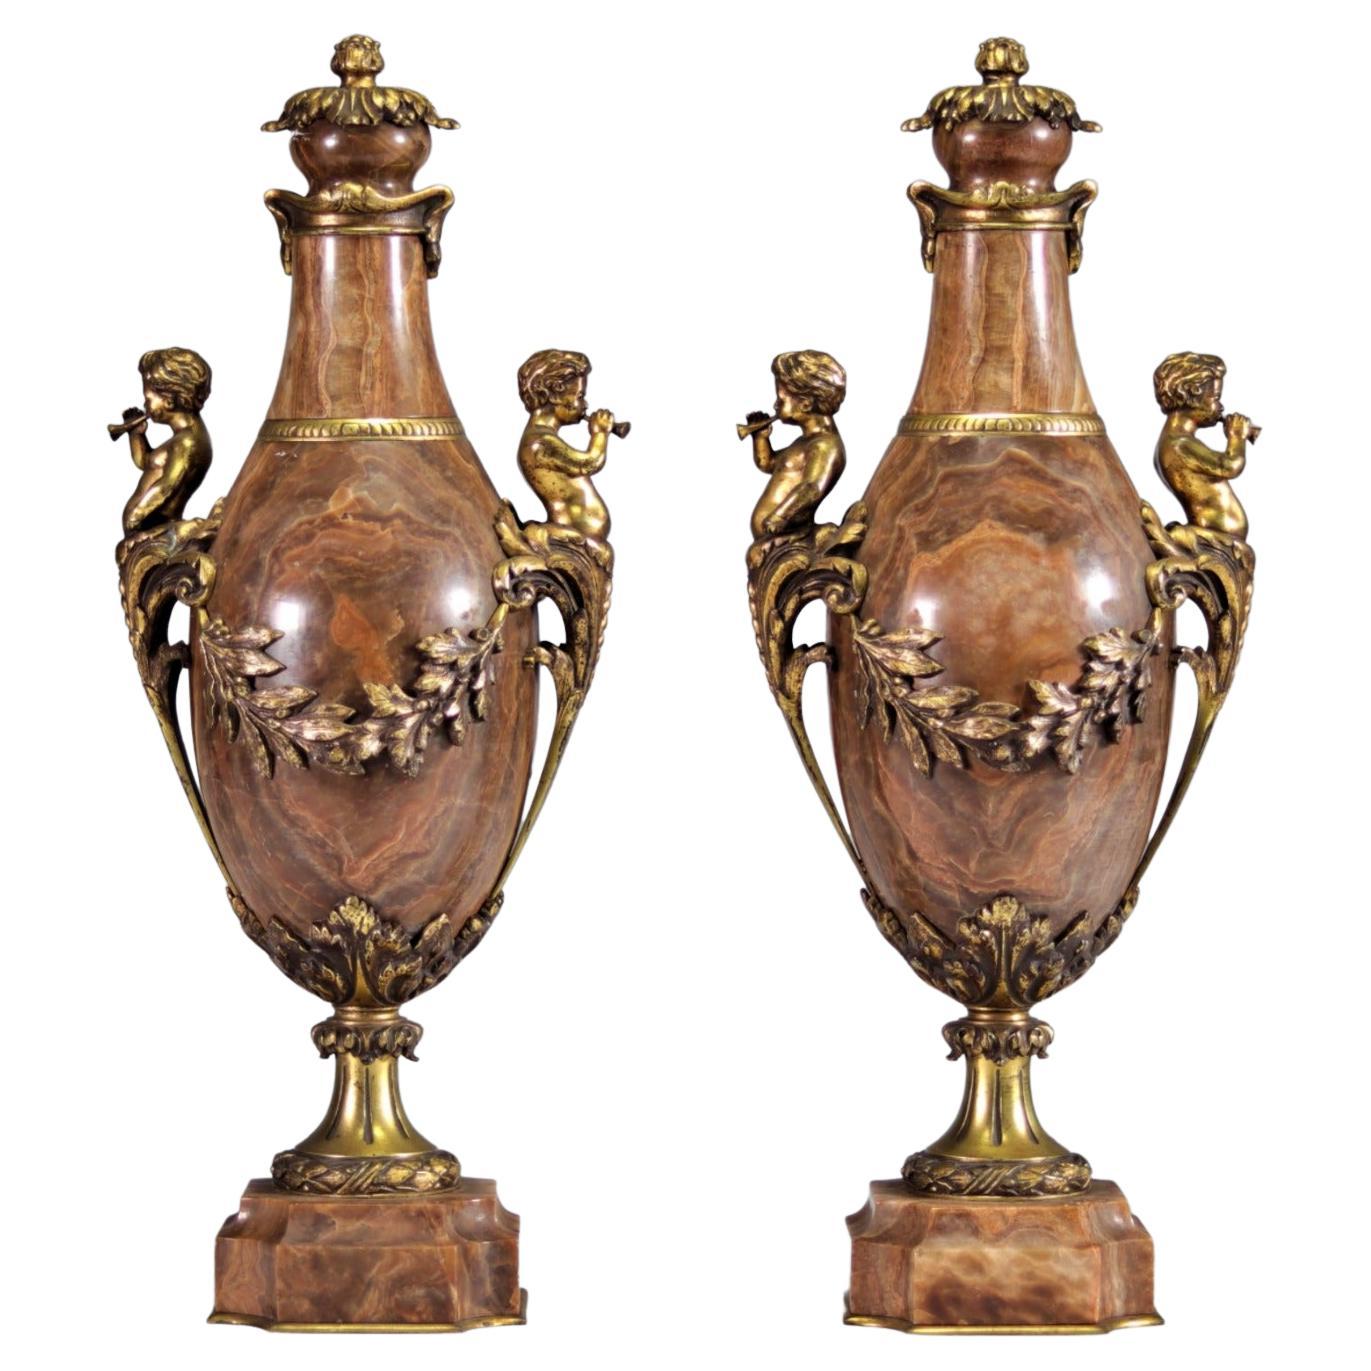 Pair of Marble Vases Decorated with Gilt Bronze Musical Fauns, 19th Century